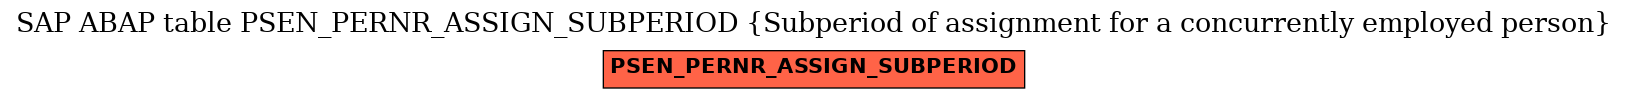 E-R Diagram for table PSEN_PERNR_ASSIGN_SUBPERIOD (Subperiod of assignment for a concurrently employed person)